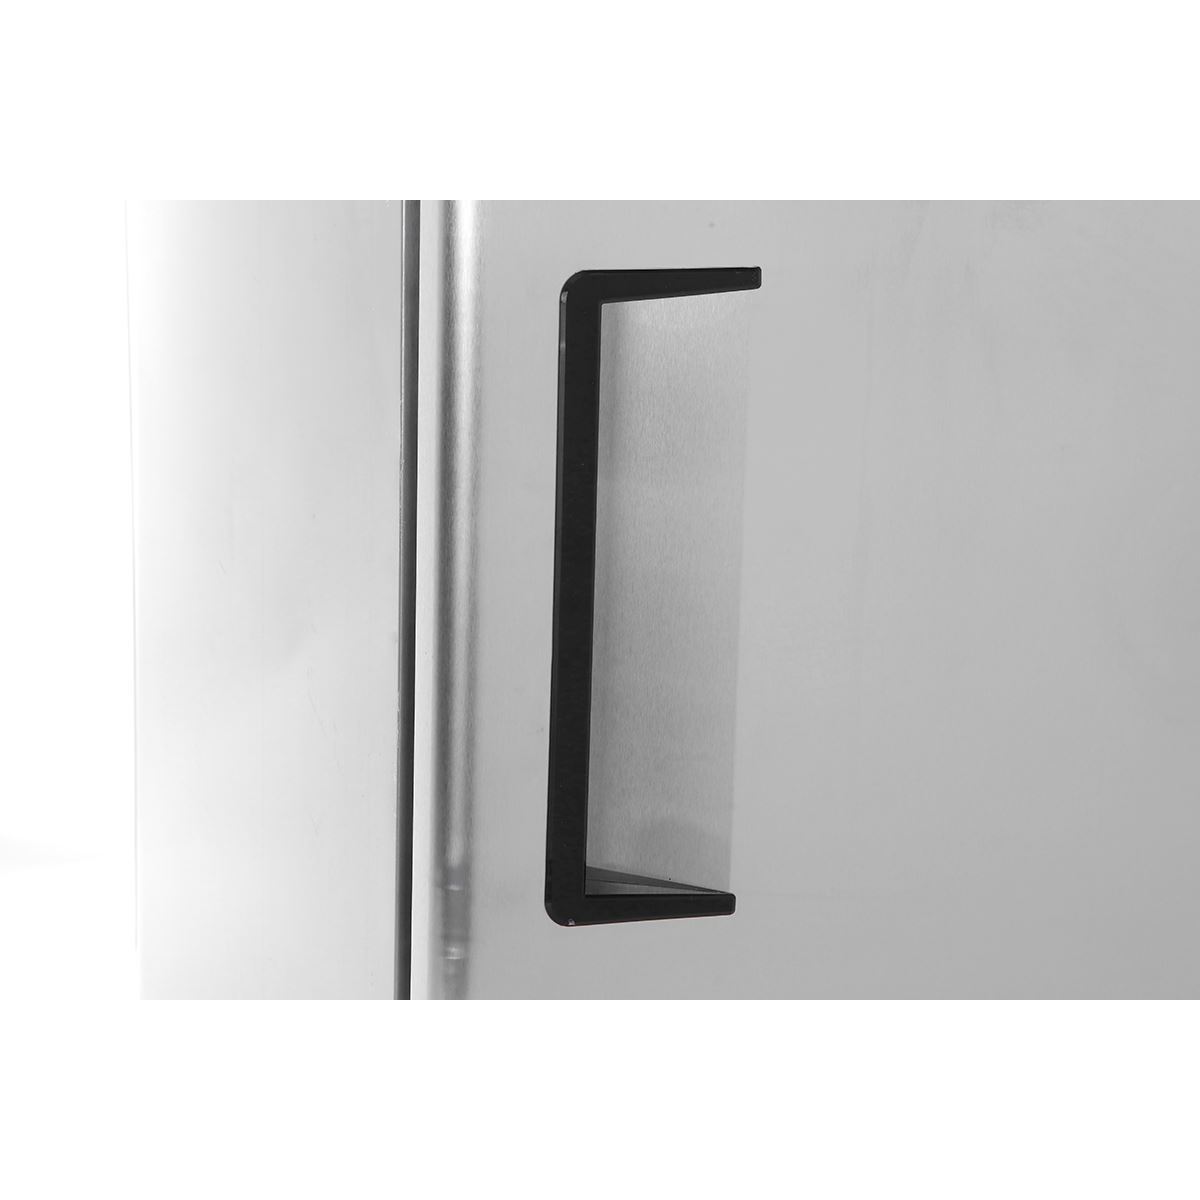 Atosa MBF8007GR Two 1/2 Door 29" Upright Reach-In Freezer Top Mount Series, Right Hinge - TheChefStore.Com